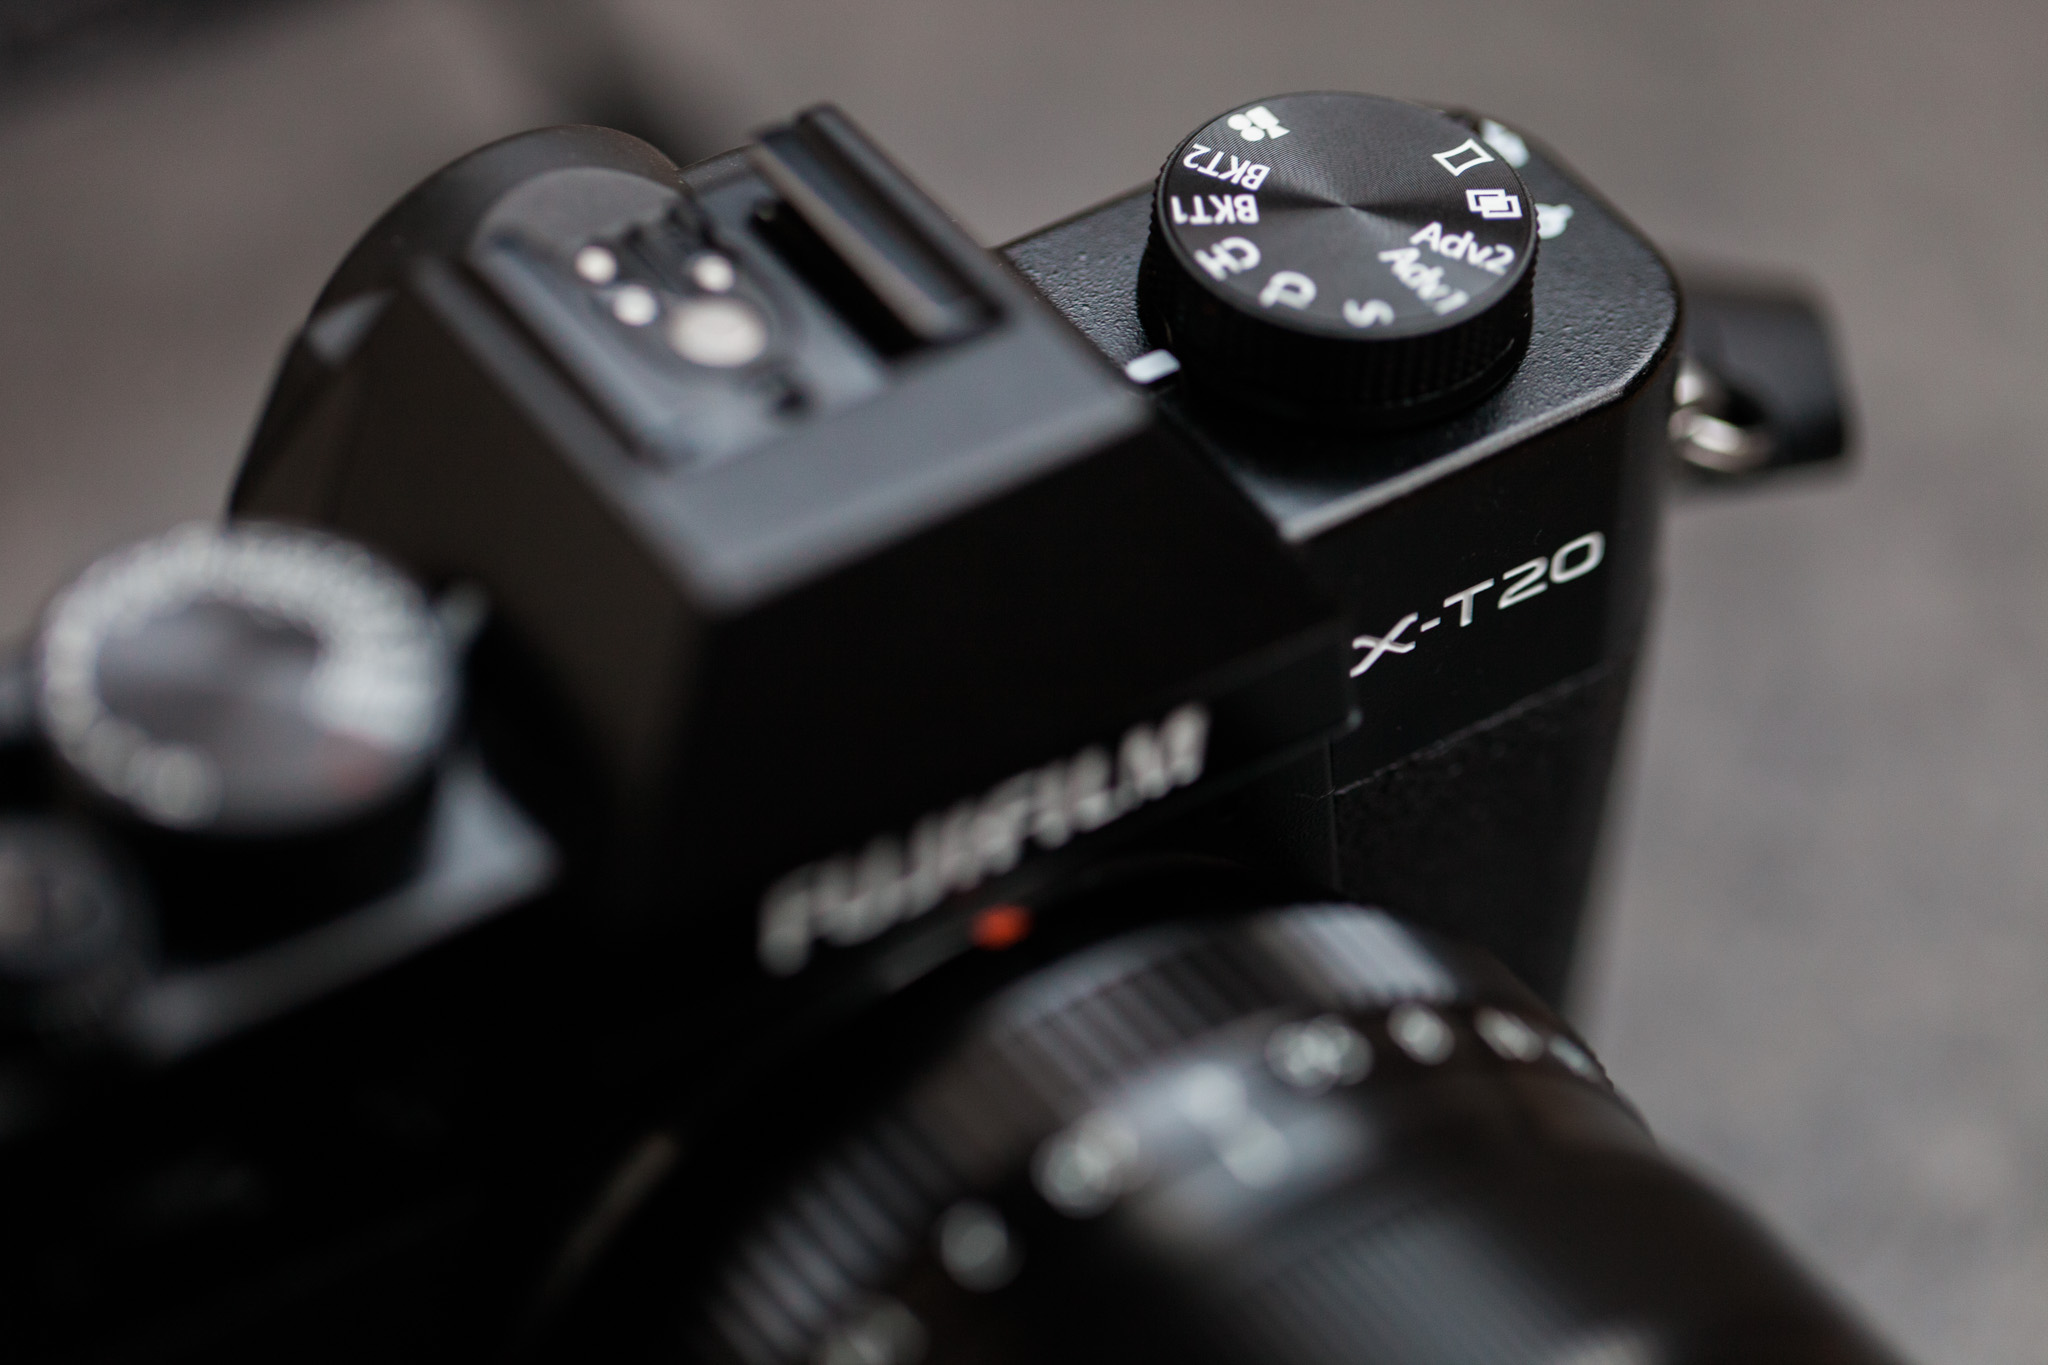 Incarijk Slot Verliefd Fuji X-T20 Review | Oversized Performance In A Pint-Sized Camera